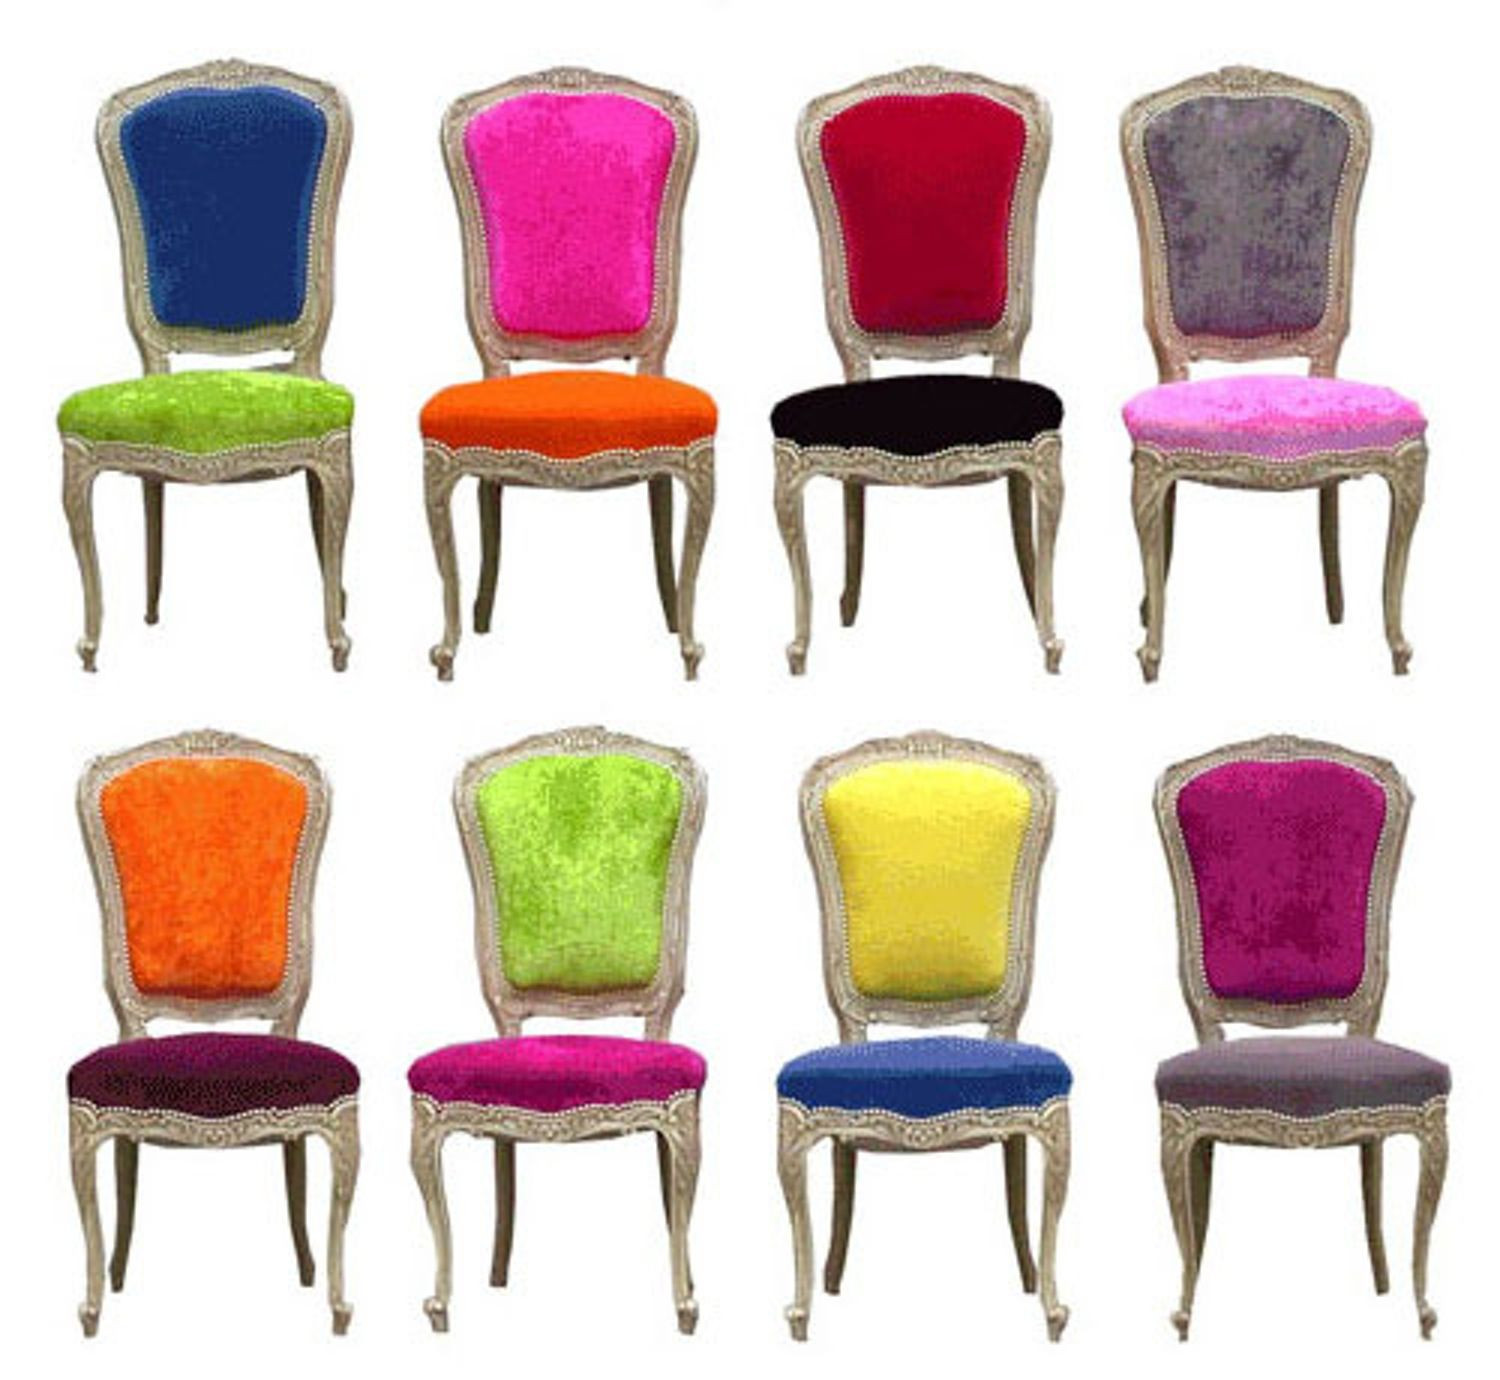 20 Perfect Funky Chairs for Living Room - Home, Decoration, Style and